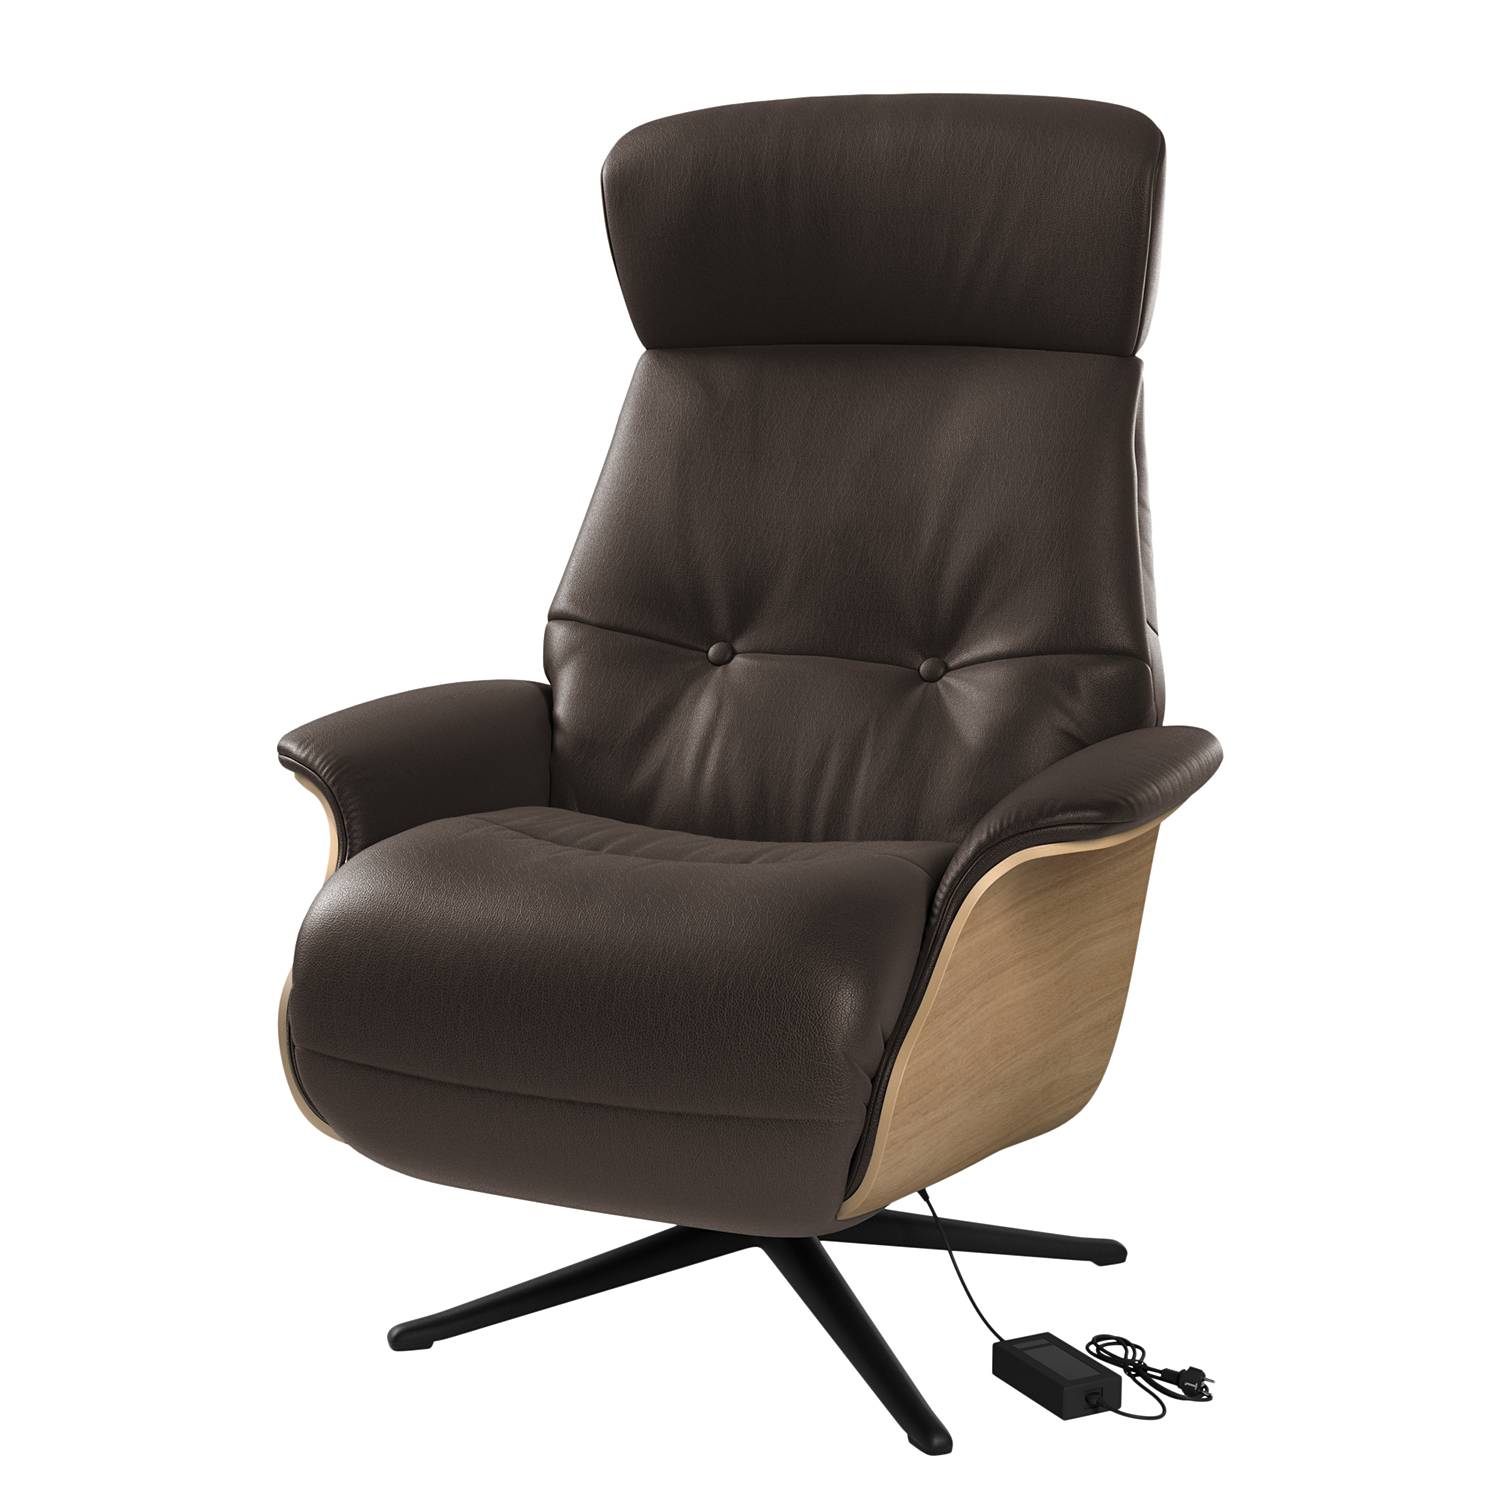 Image of Fauteuil relax Anderson VI 000000001000131434